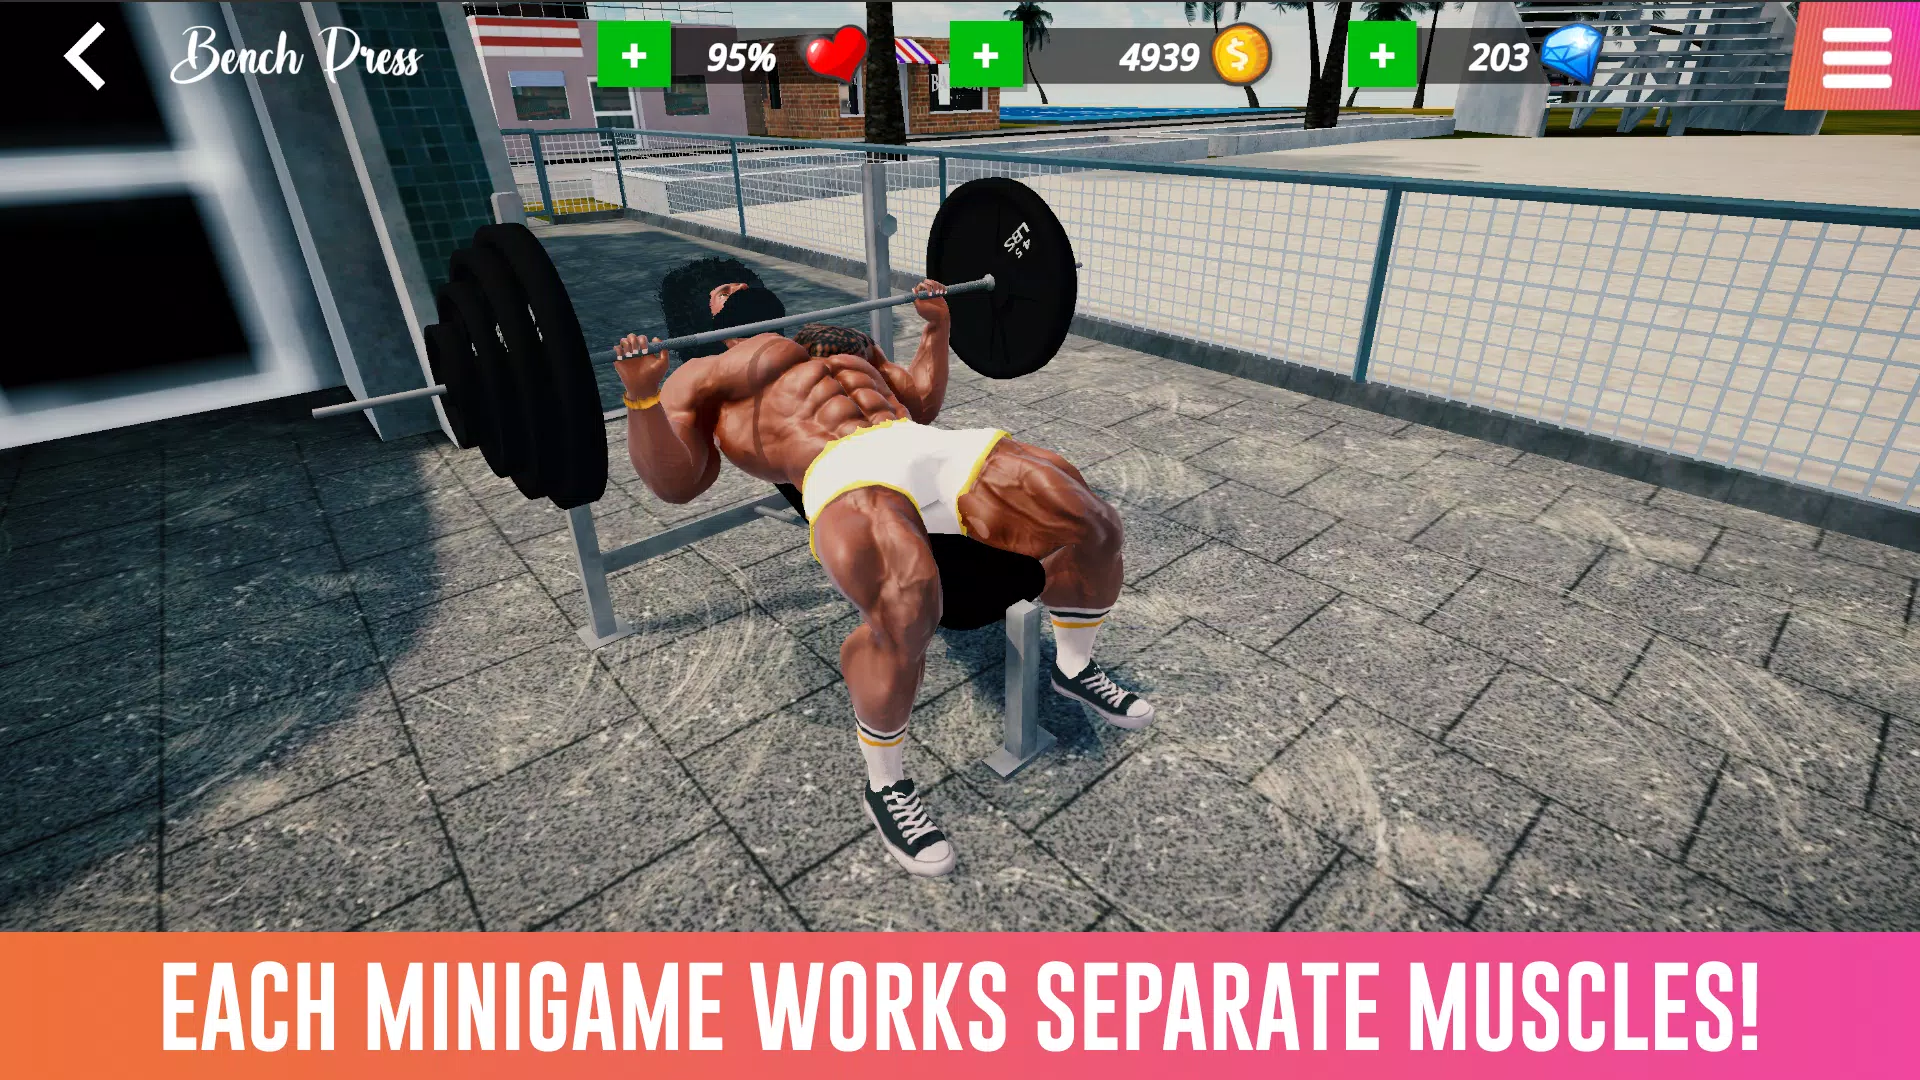 Iron Muscle IV: gym game for Android - APK Download